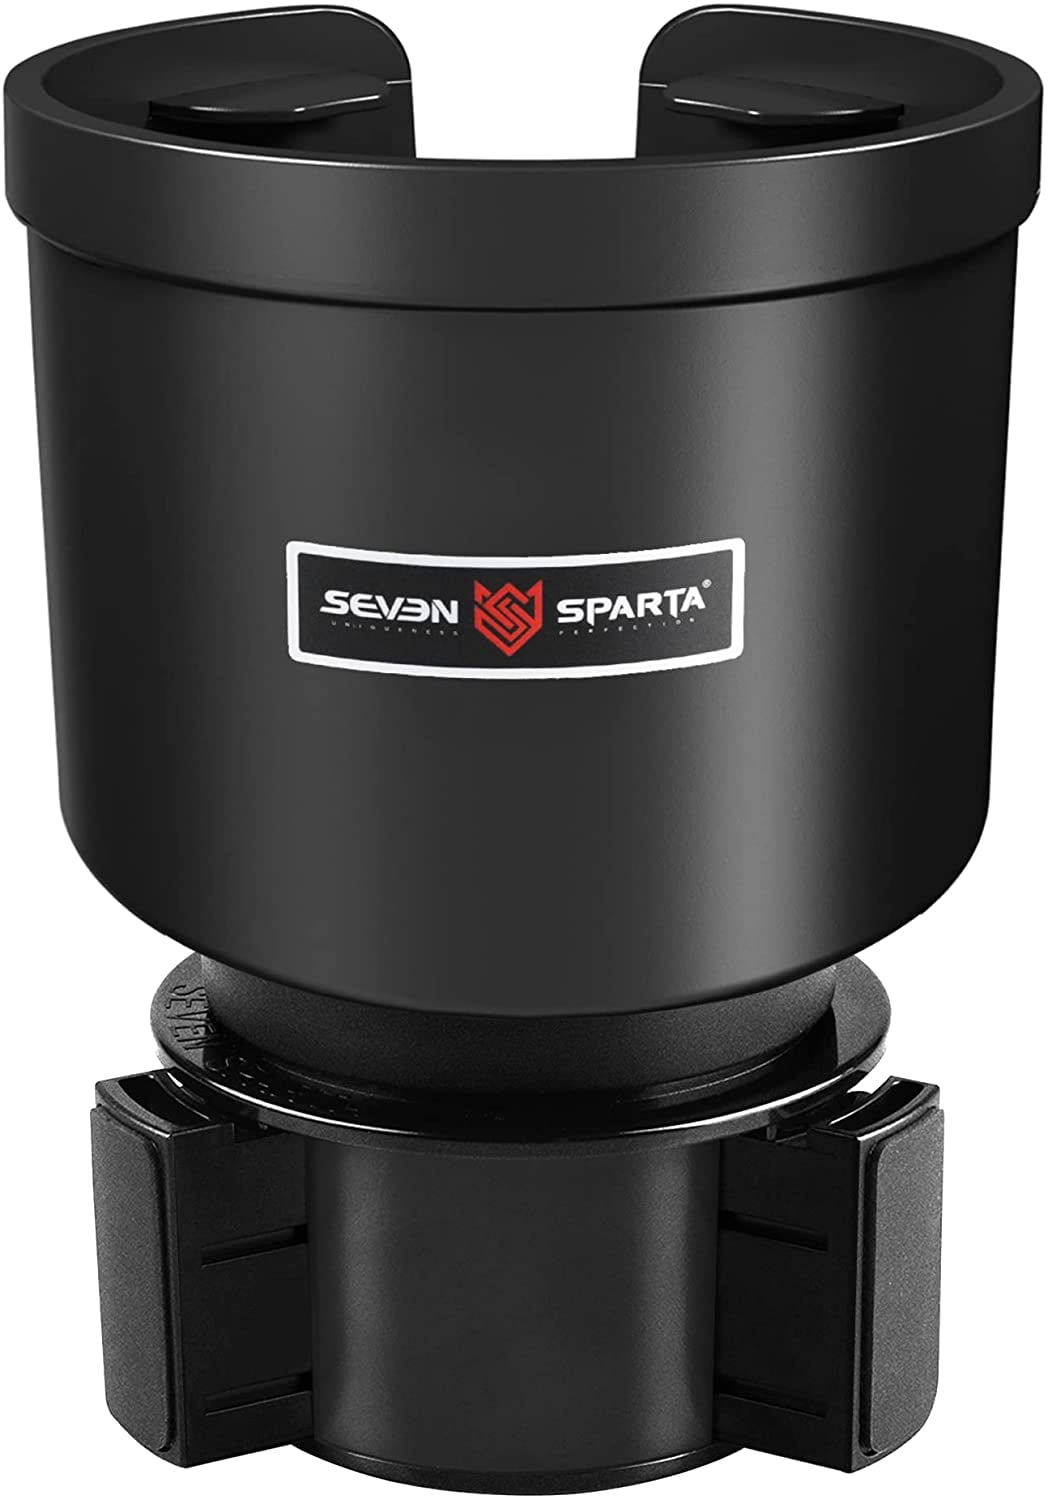 Seven Sparta 2-in-1 Car Cup Holder Phone Mount with 360° Rotation